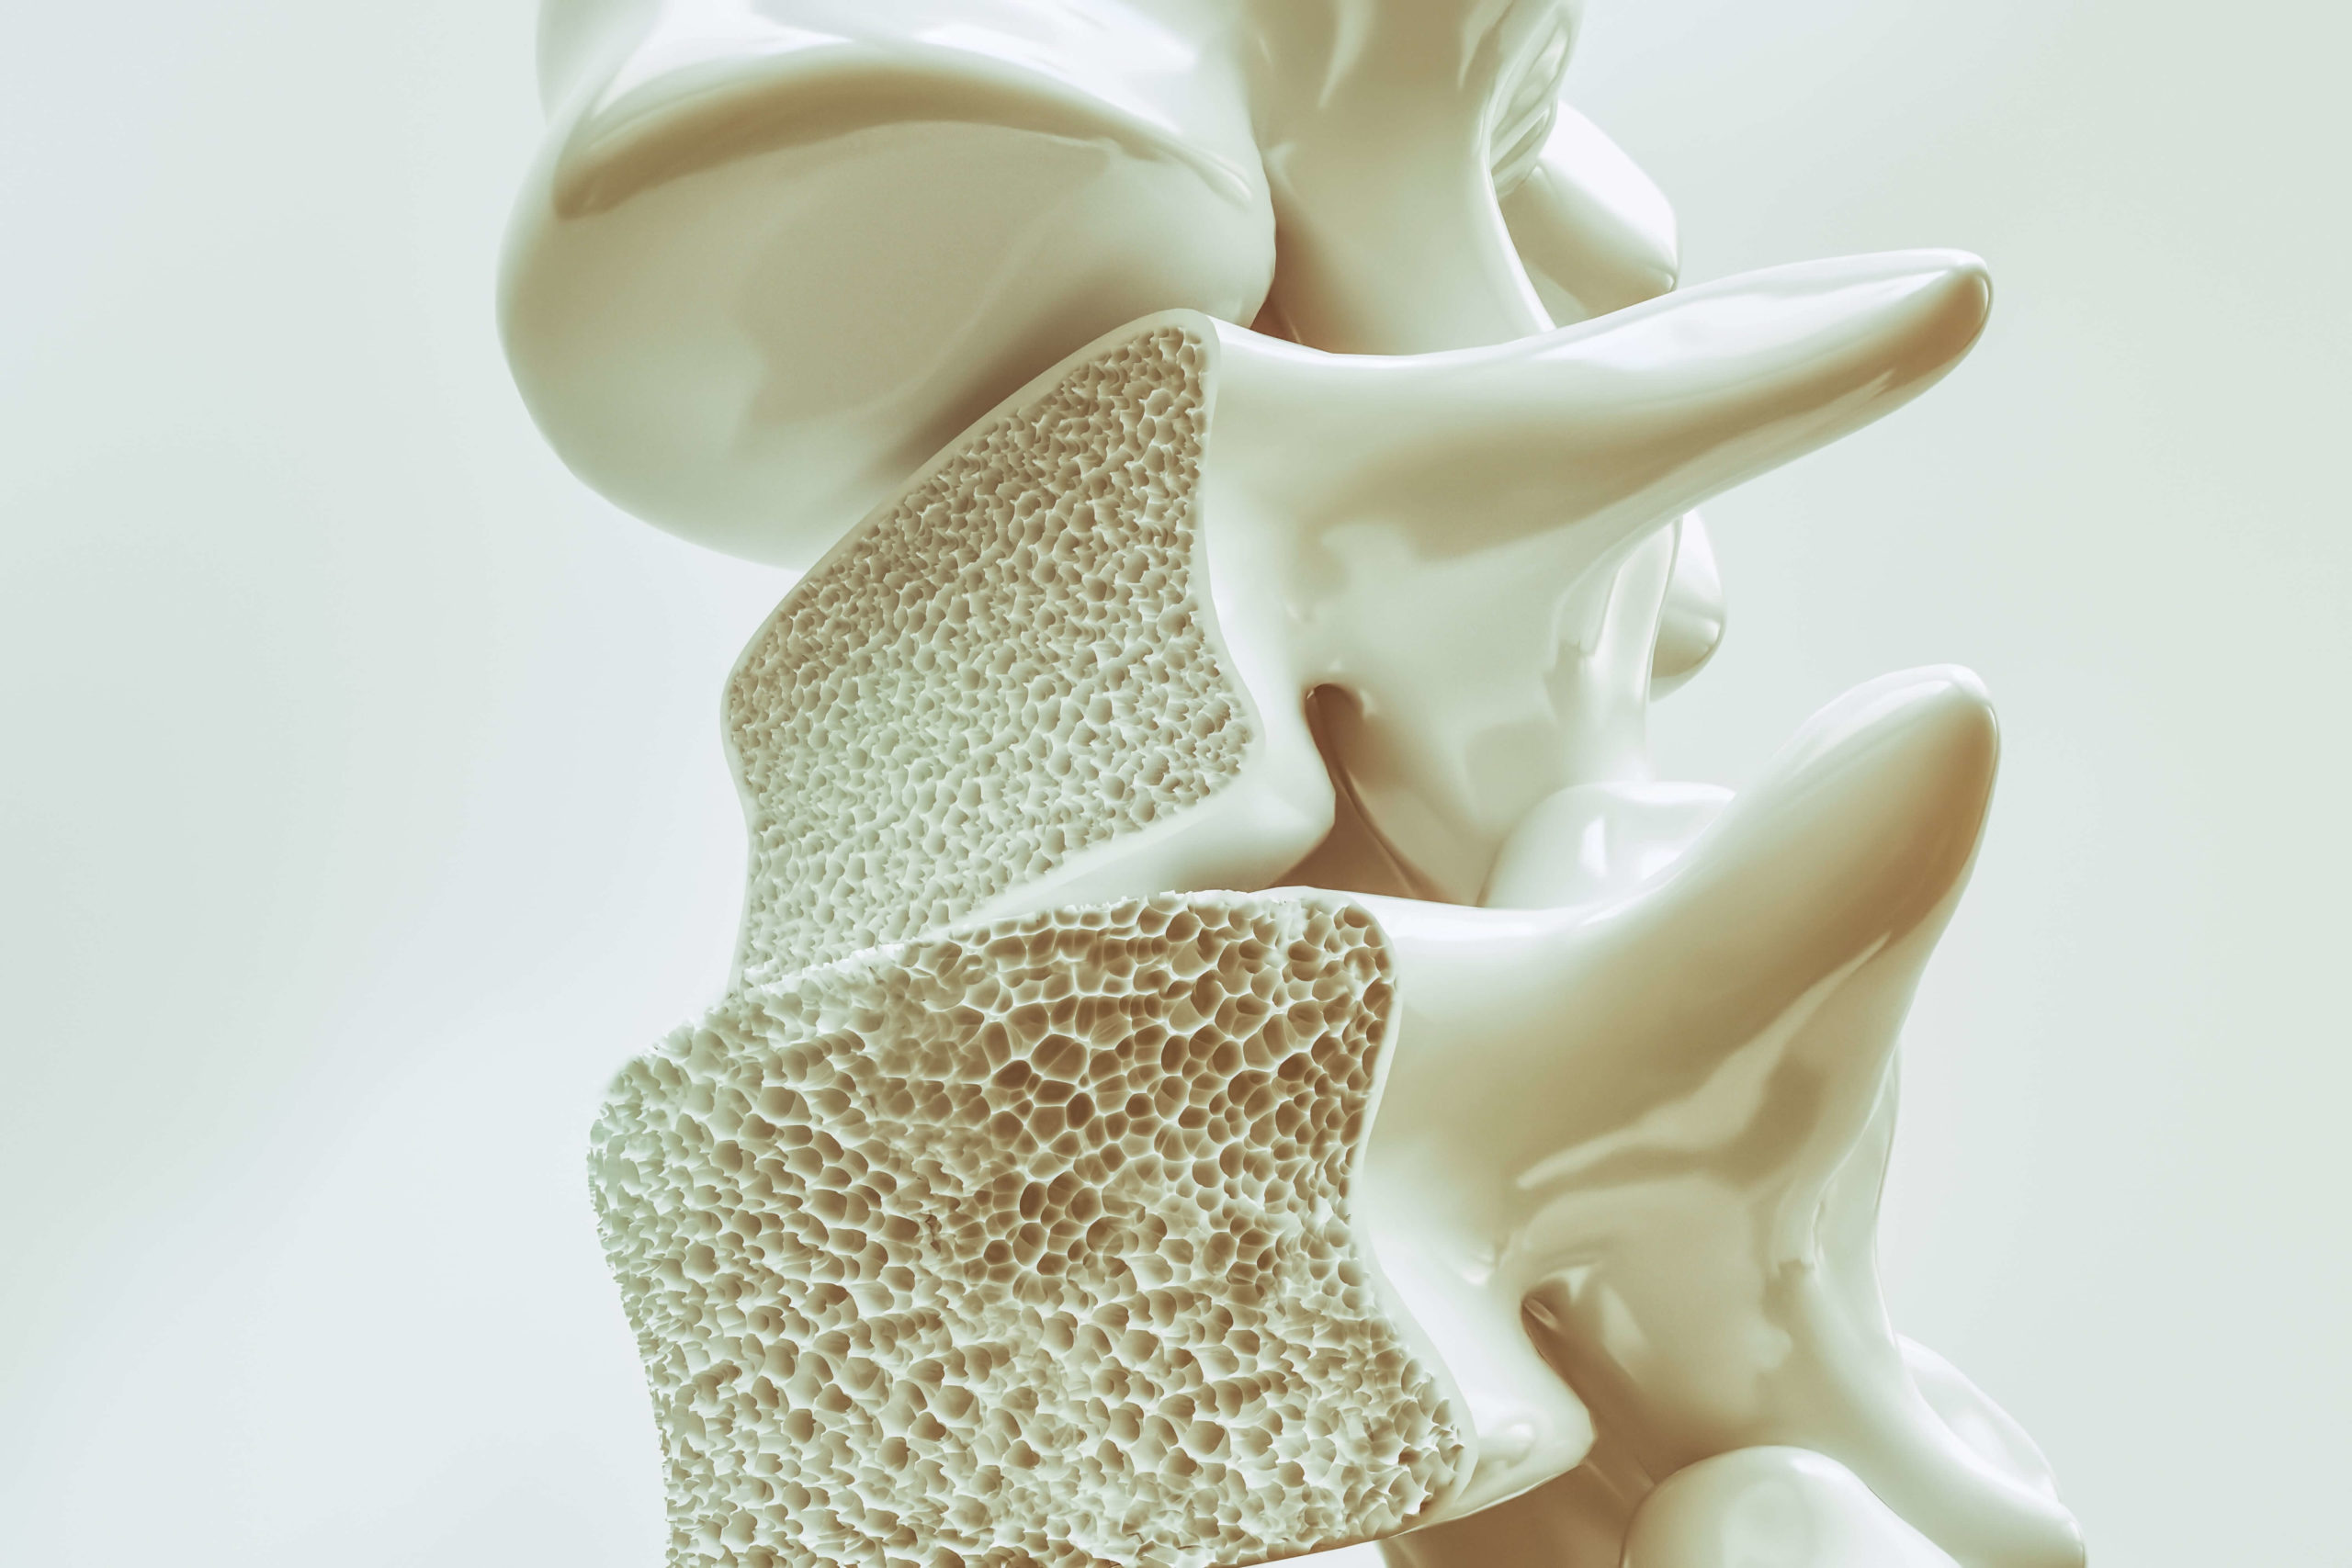 Improve Bone Health and Reduce Your Risk of Osteoporosis